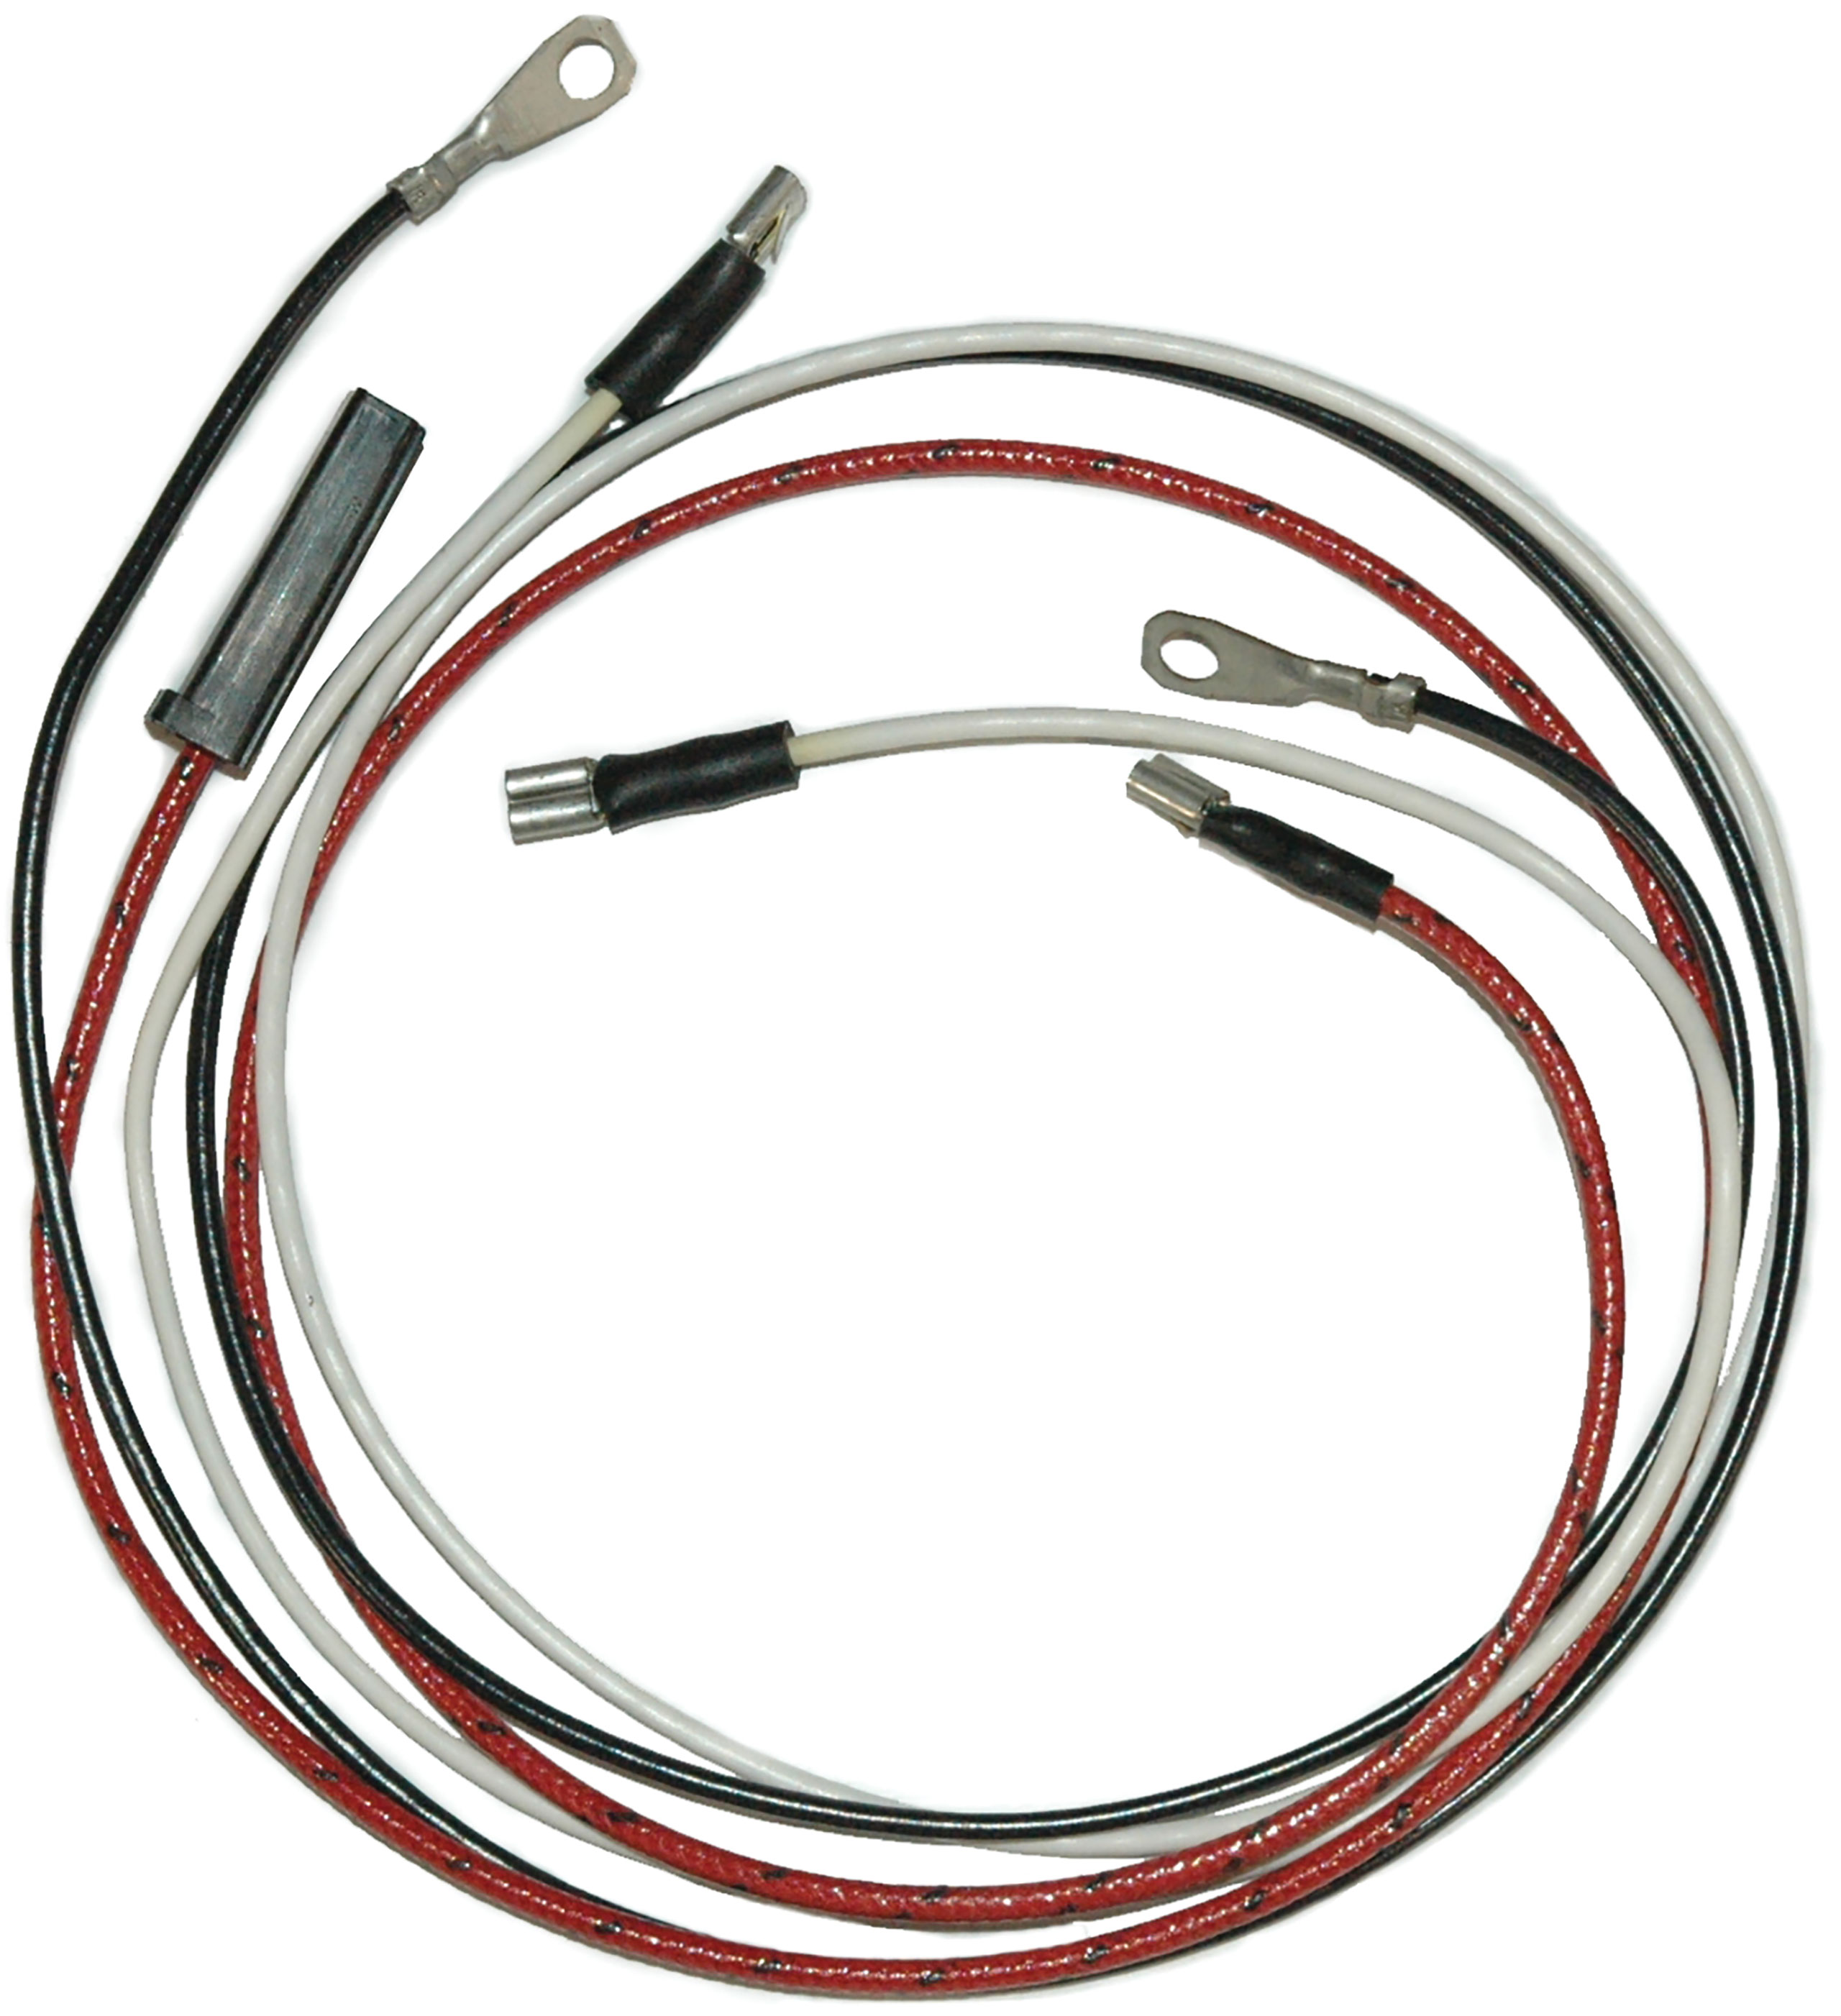 C1 1955-1957 Chevrolet Corvette Heater Extension Wire. - Lectric Limited, Inc.